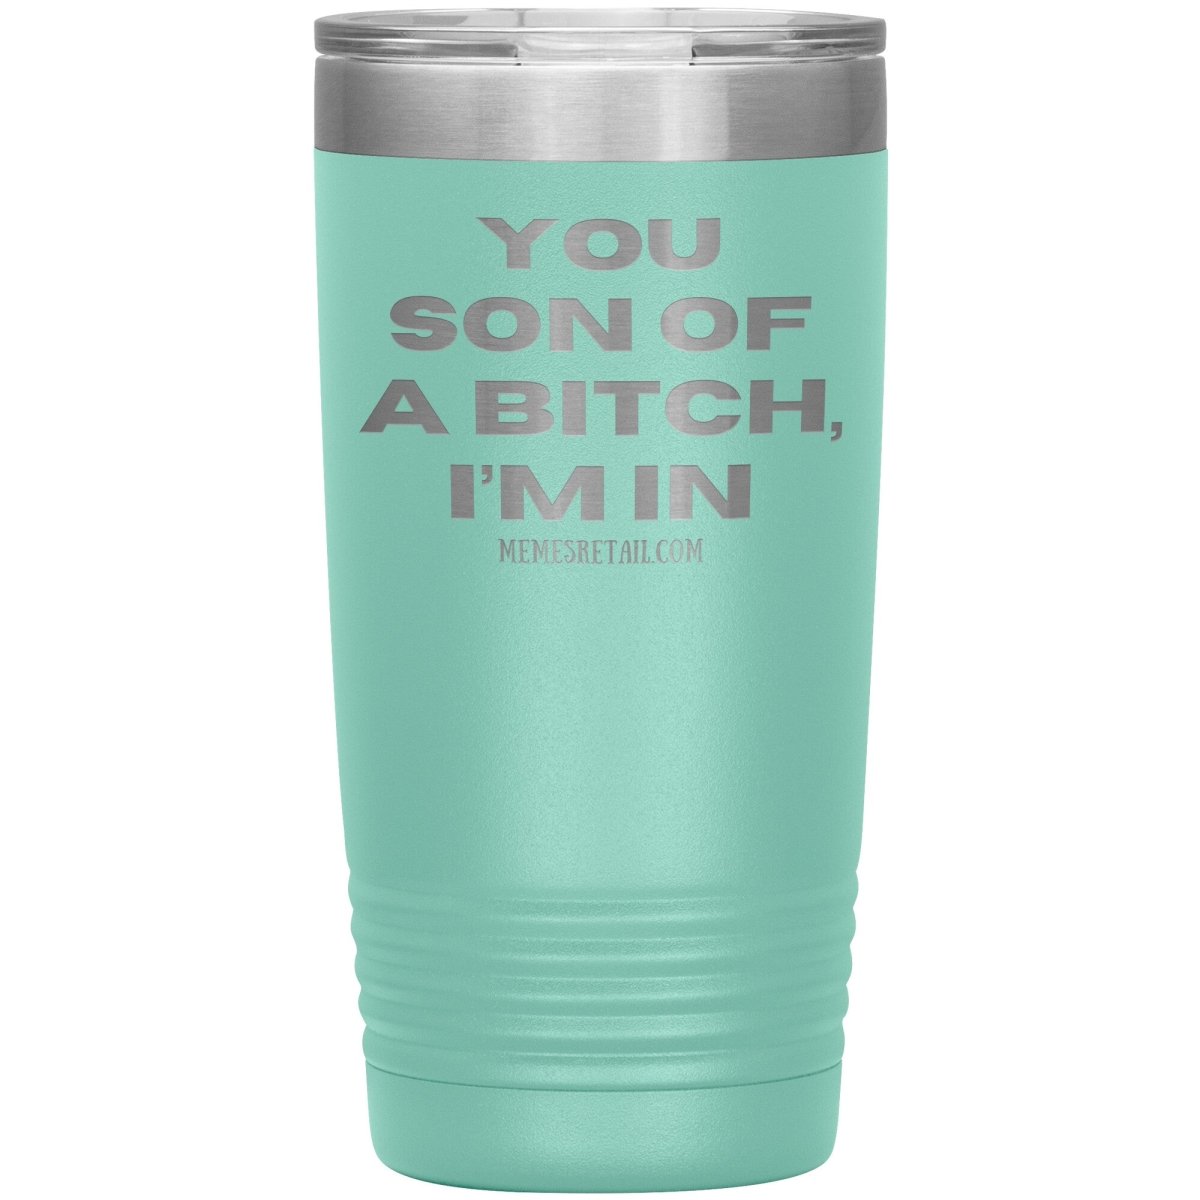 You son of a bitch, I’m in Tumblers, 20oz Insulated Tumbler / Teal - MemesRetail.com